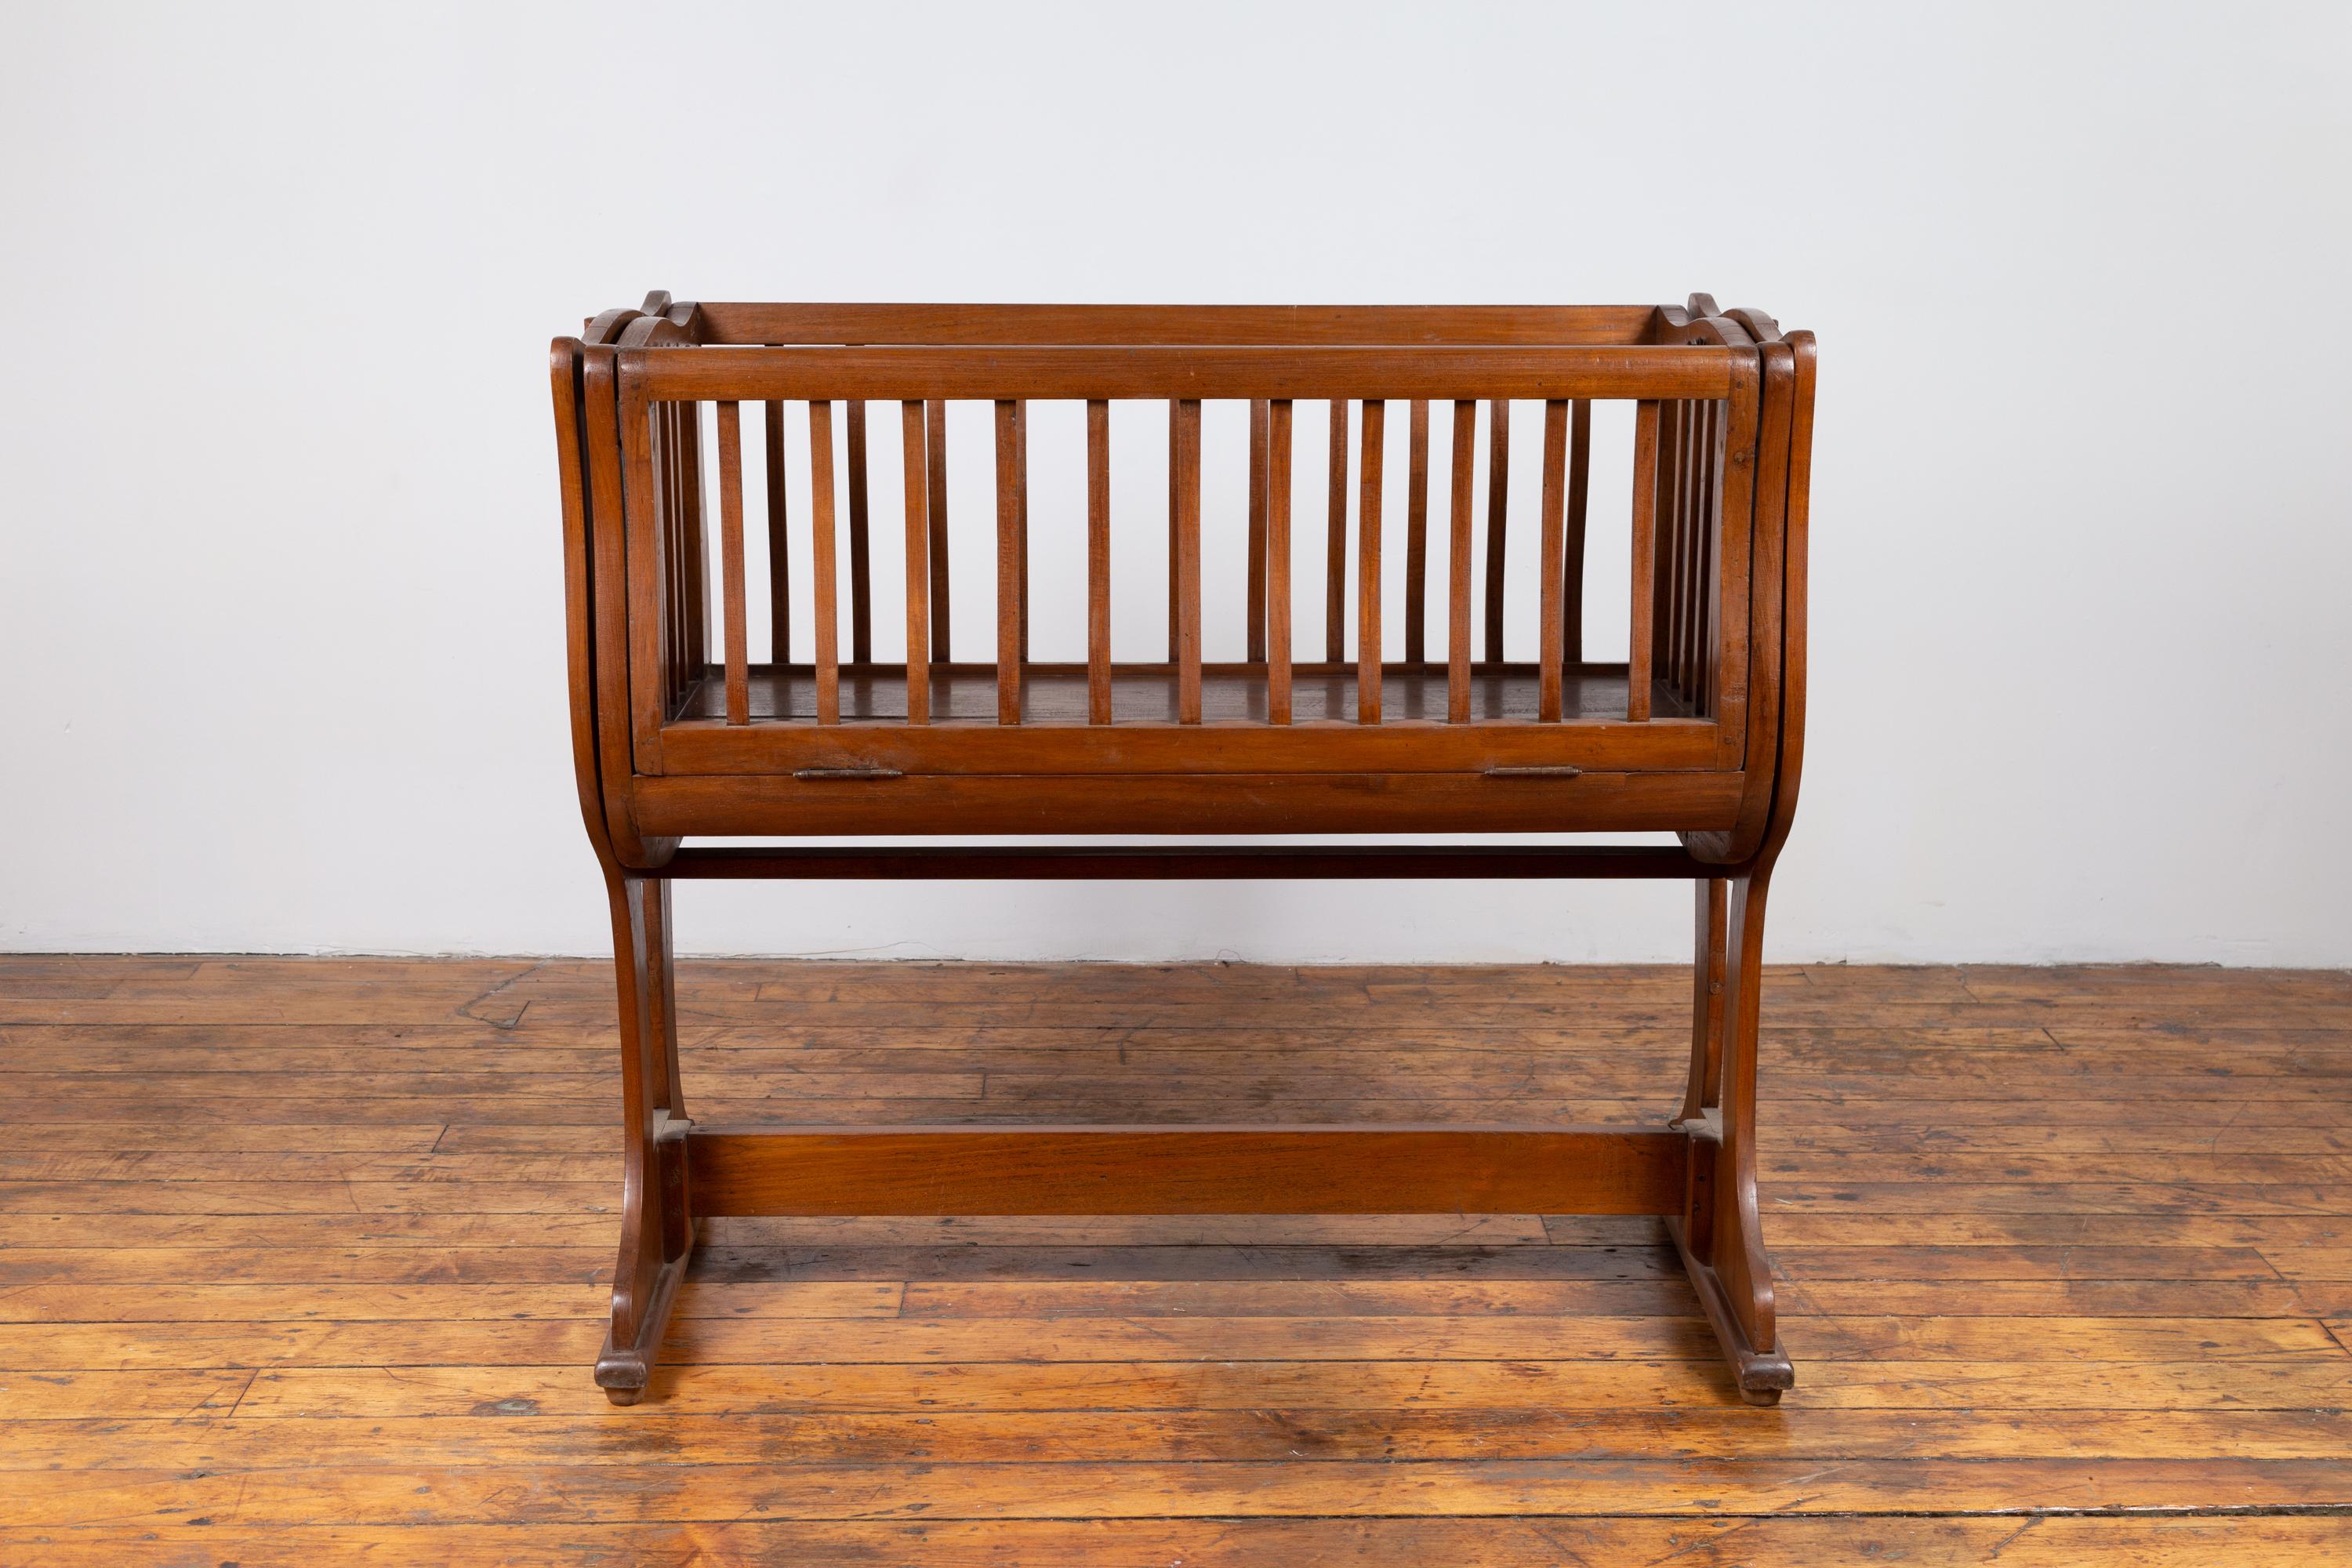 An antique Indonesian baby cradle from the early 20th century, transforming into a one of a kind seat. Born in Indonesia during the early years of the 20th century, this exquisite wooden baby cradle is raised on a trestle base. Rocking from side to